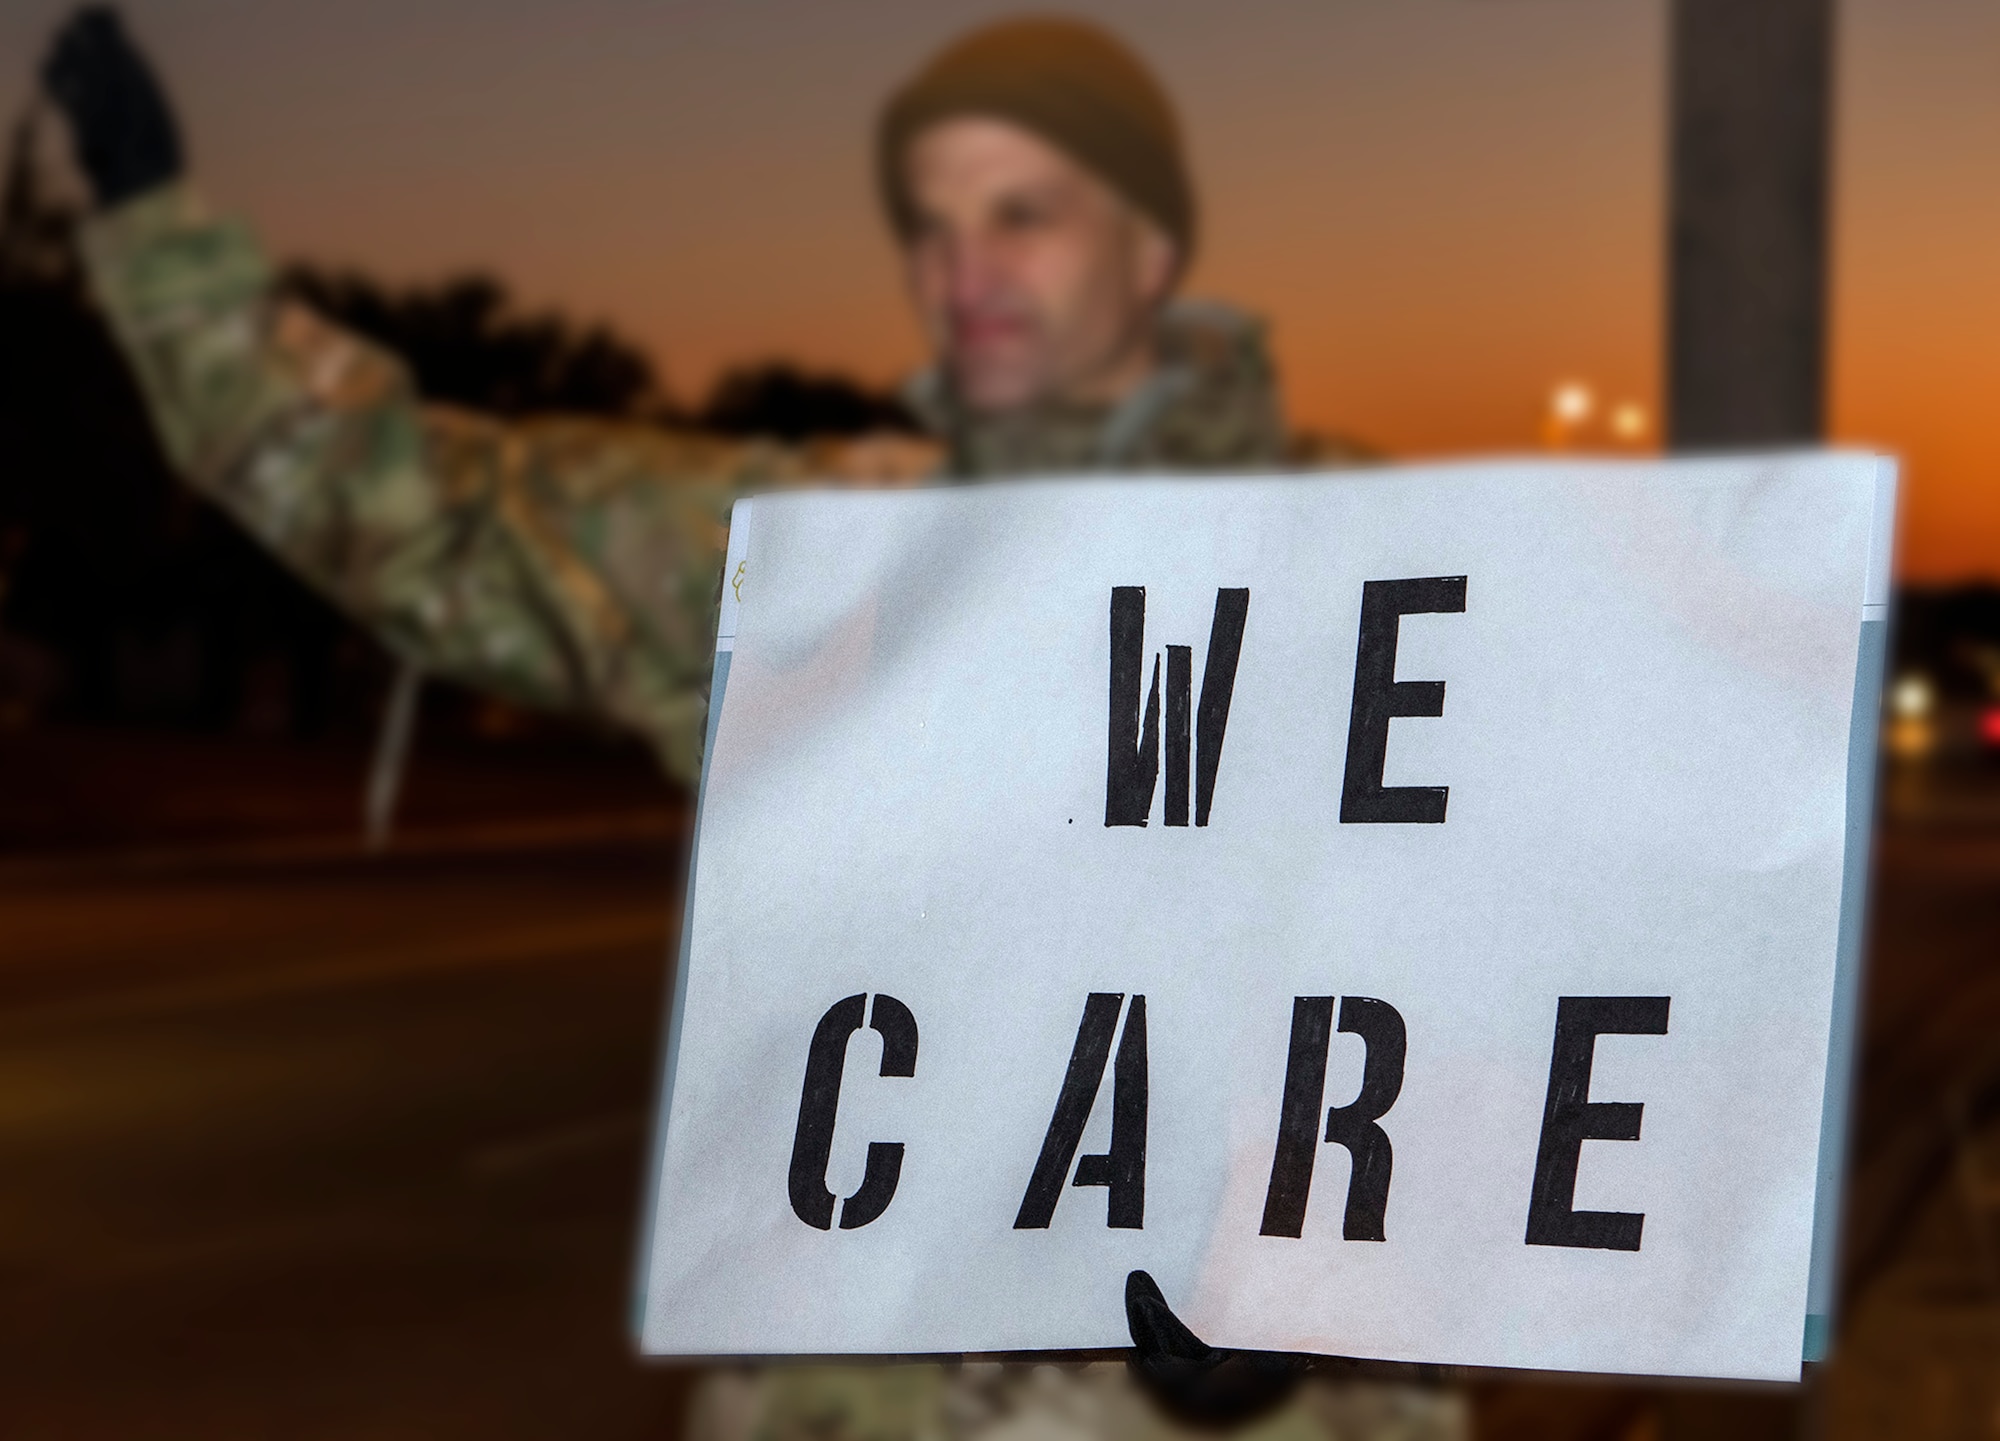 Lt. Col. Scott Christensen, 331st Training Squadron commander, holds a positive message of support at a base gate during the morning inbound commute as part of their new initiative, “We Care,” at Joint Base San Antonio-Lackland, Texas.